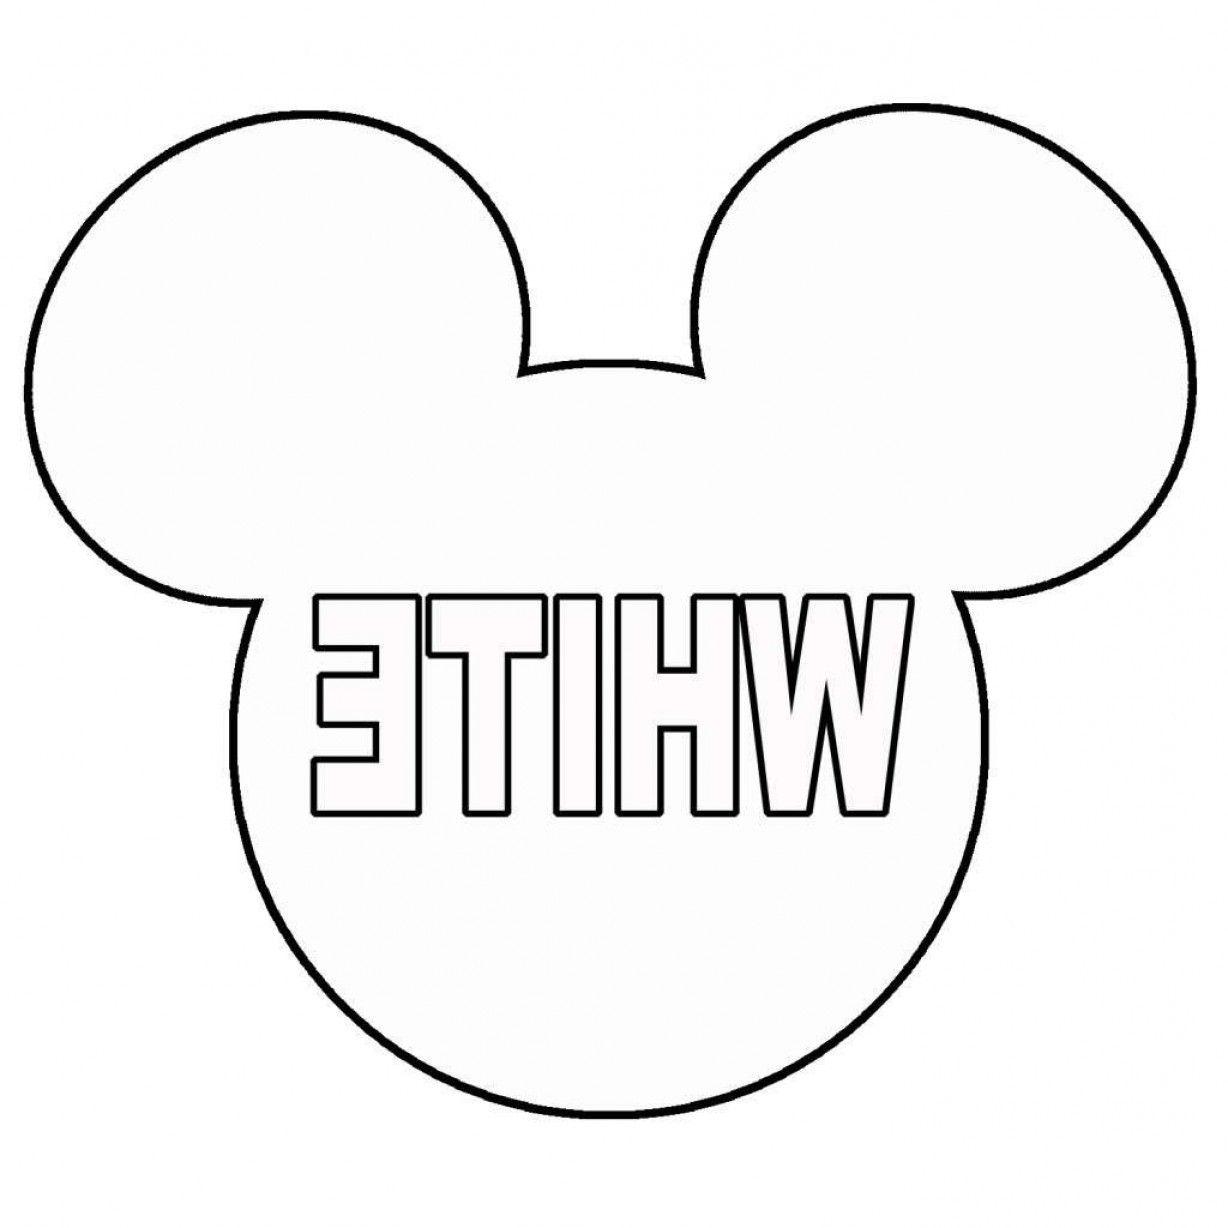 White Mickey Mouse Logo - Mickey Mouse Head Clipart Black And White | SOIDERGI